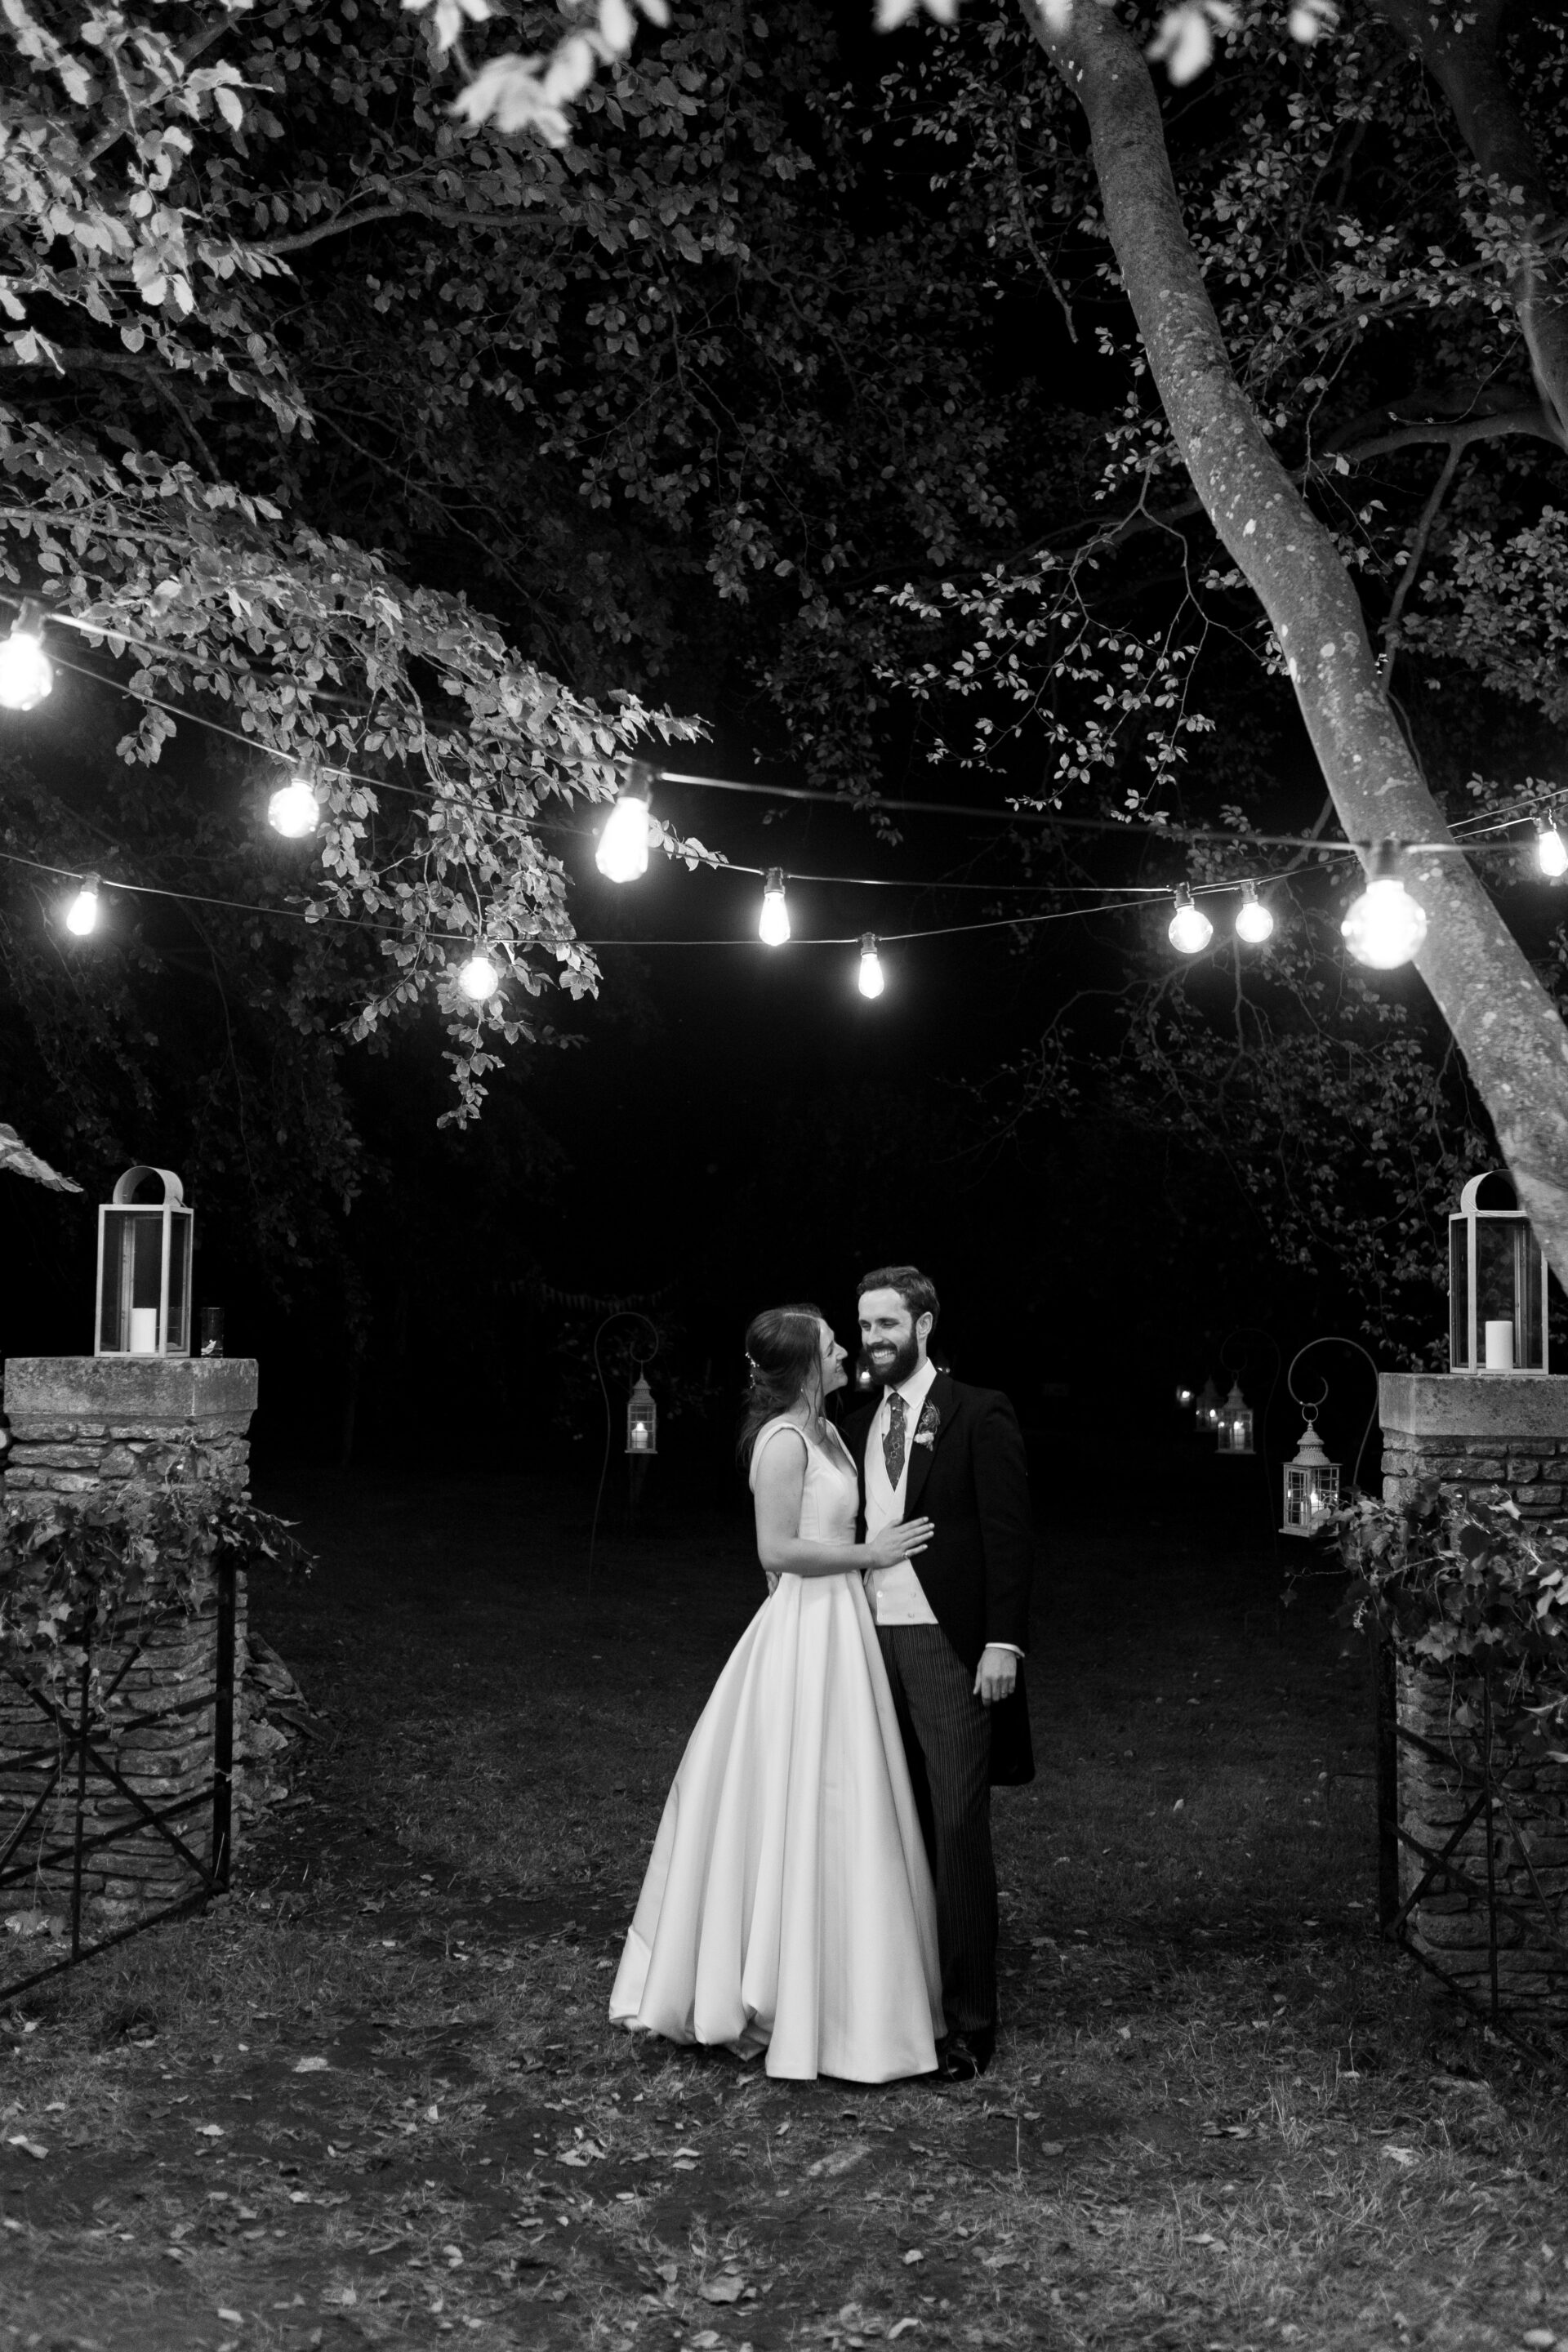 Nighttime couples portraits at a Somerset marquee wedding